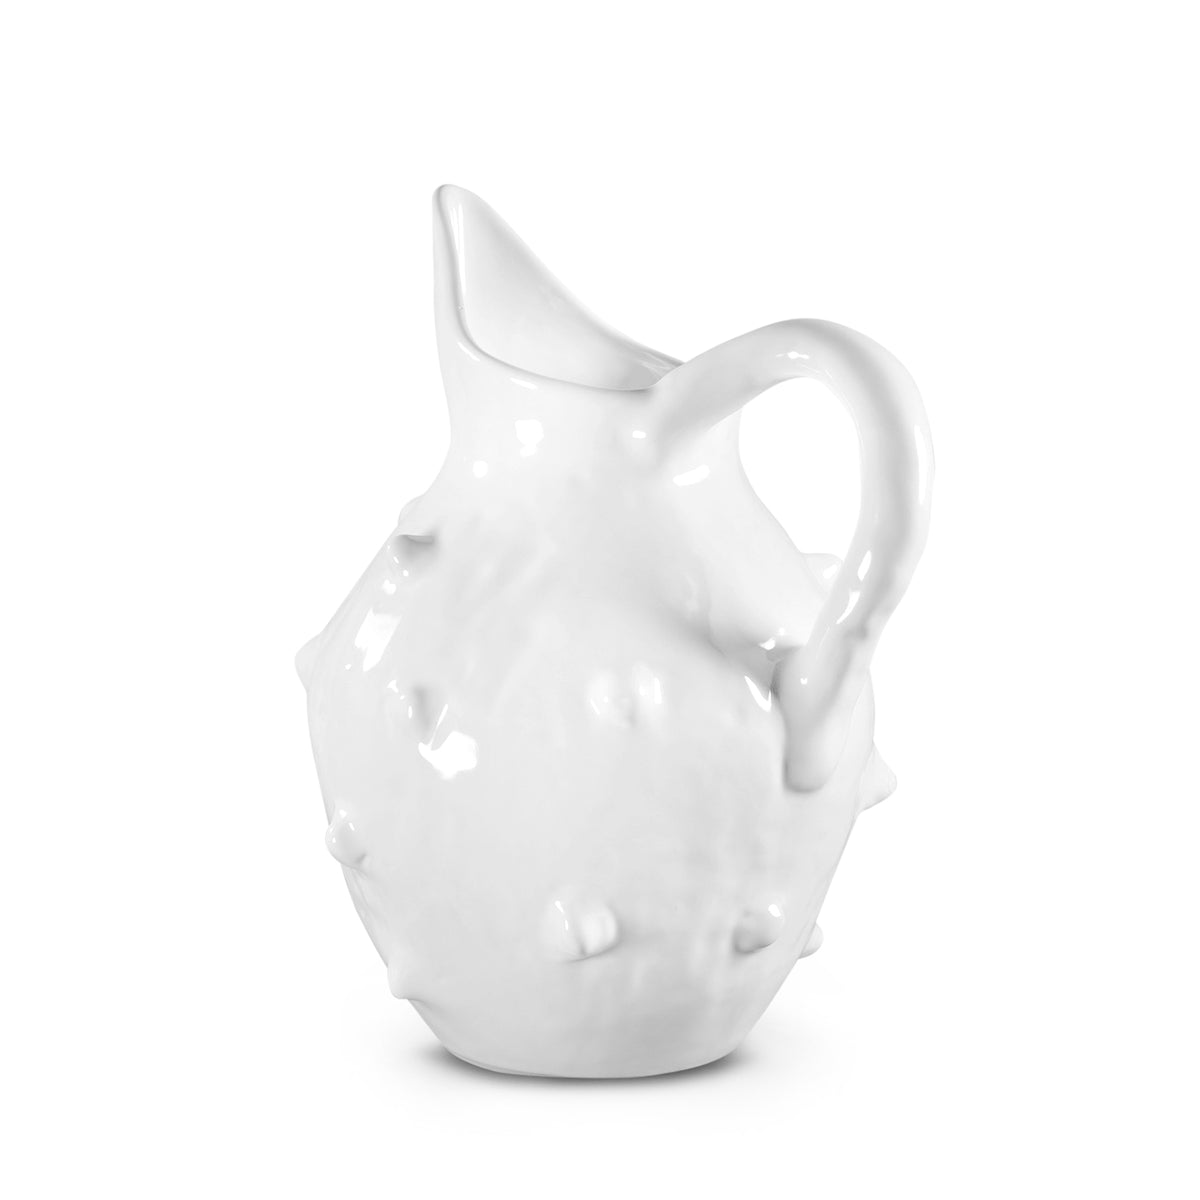 Ceramic Pitcher with Divets in White